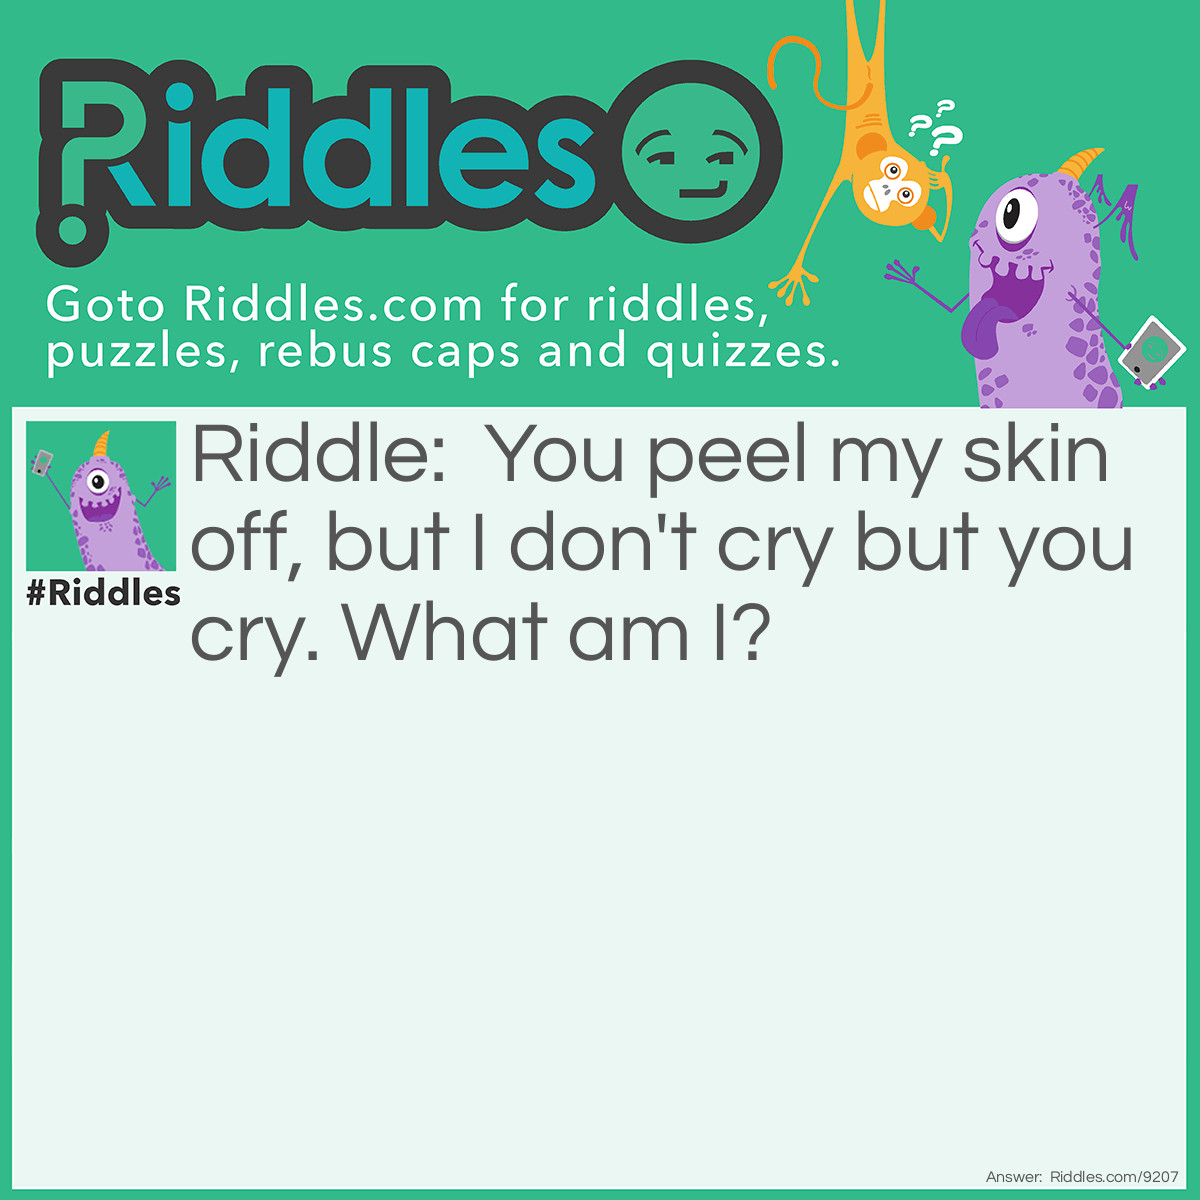 Riddle: You peel my skin off, but I don't cry but you cry. What am I? Answer: A onion.